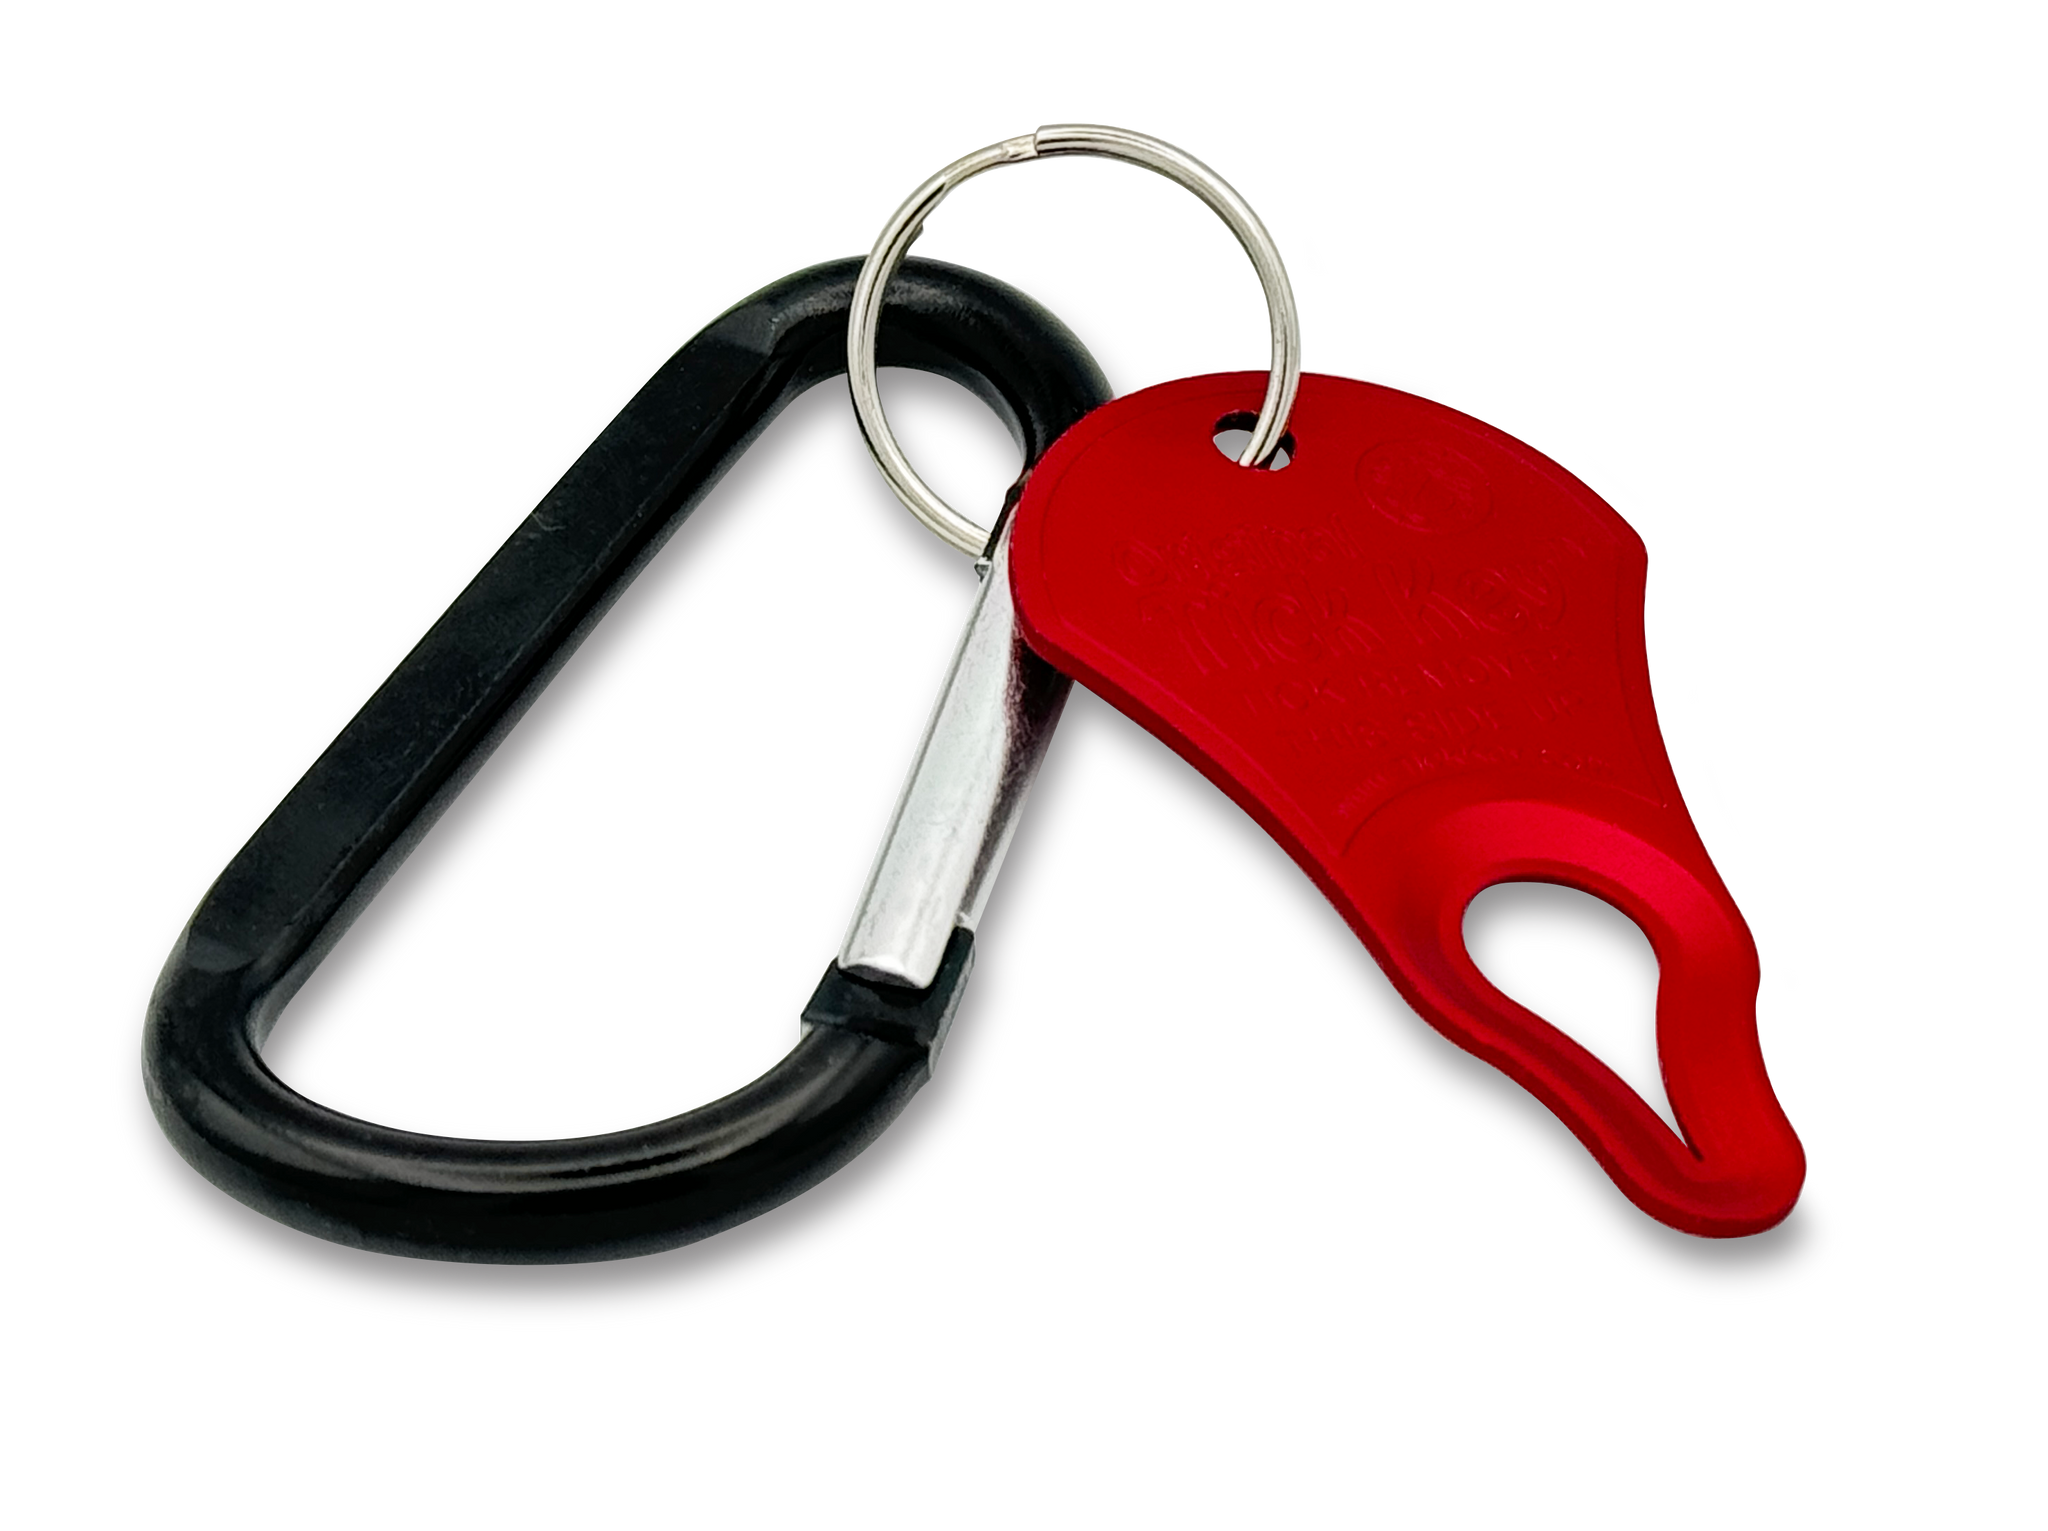 Woody's Tick Key-Red with Carabiner